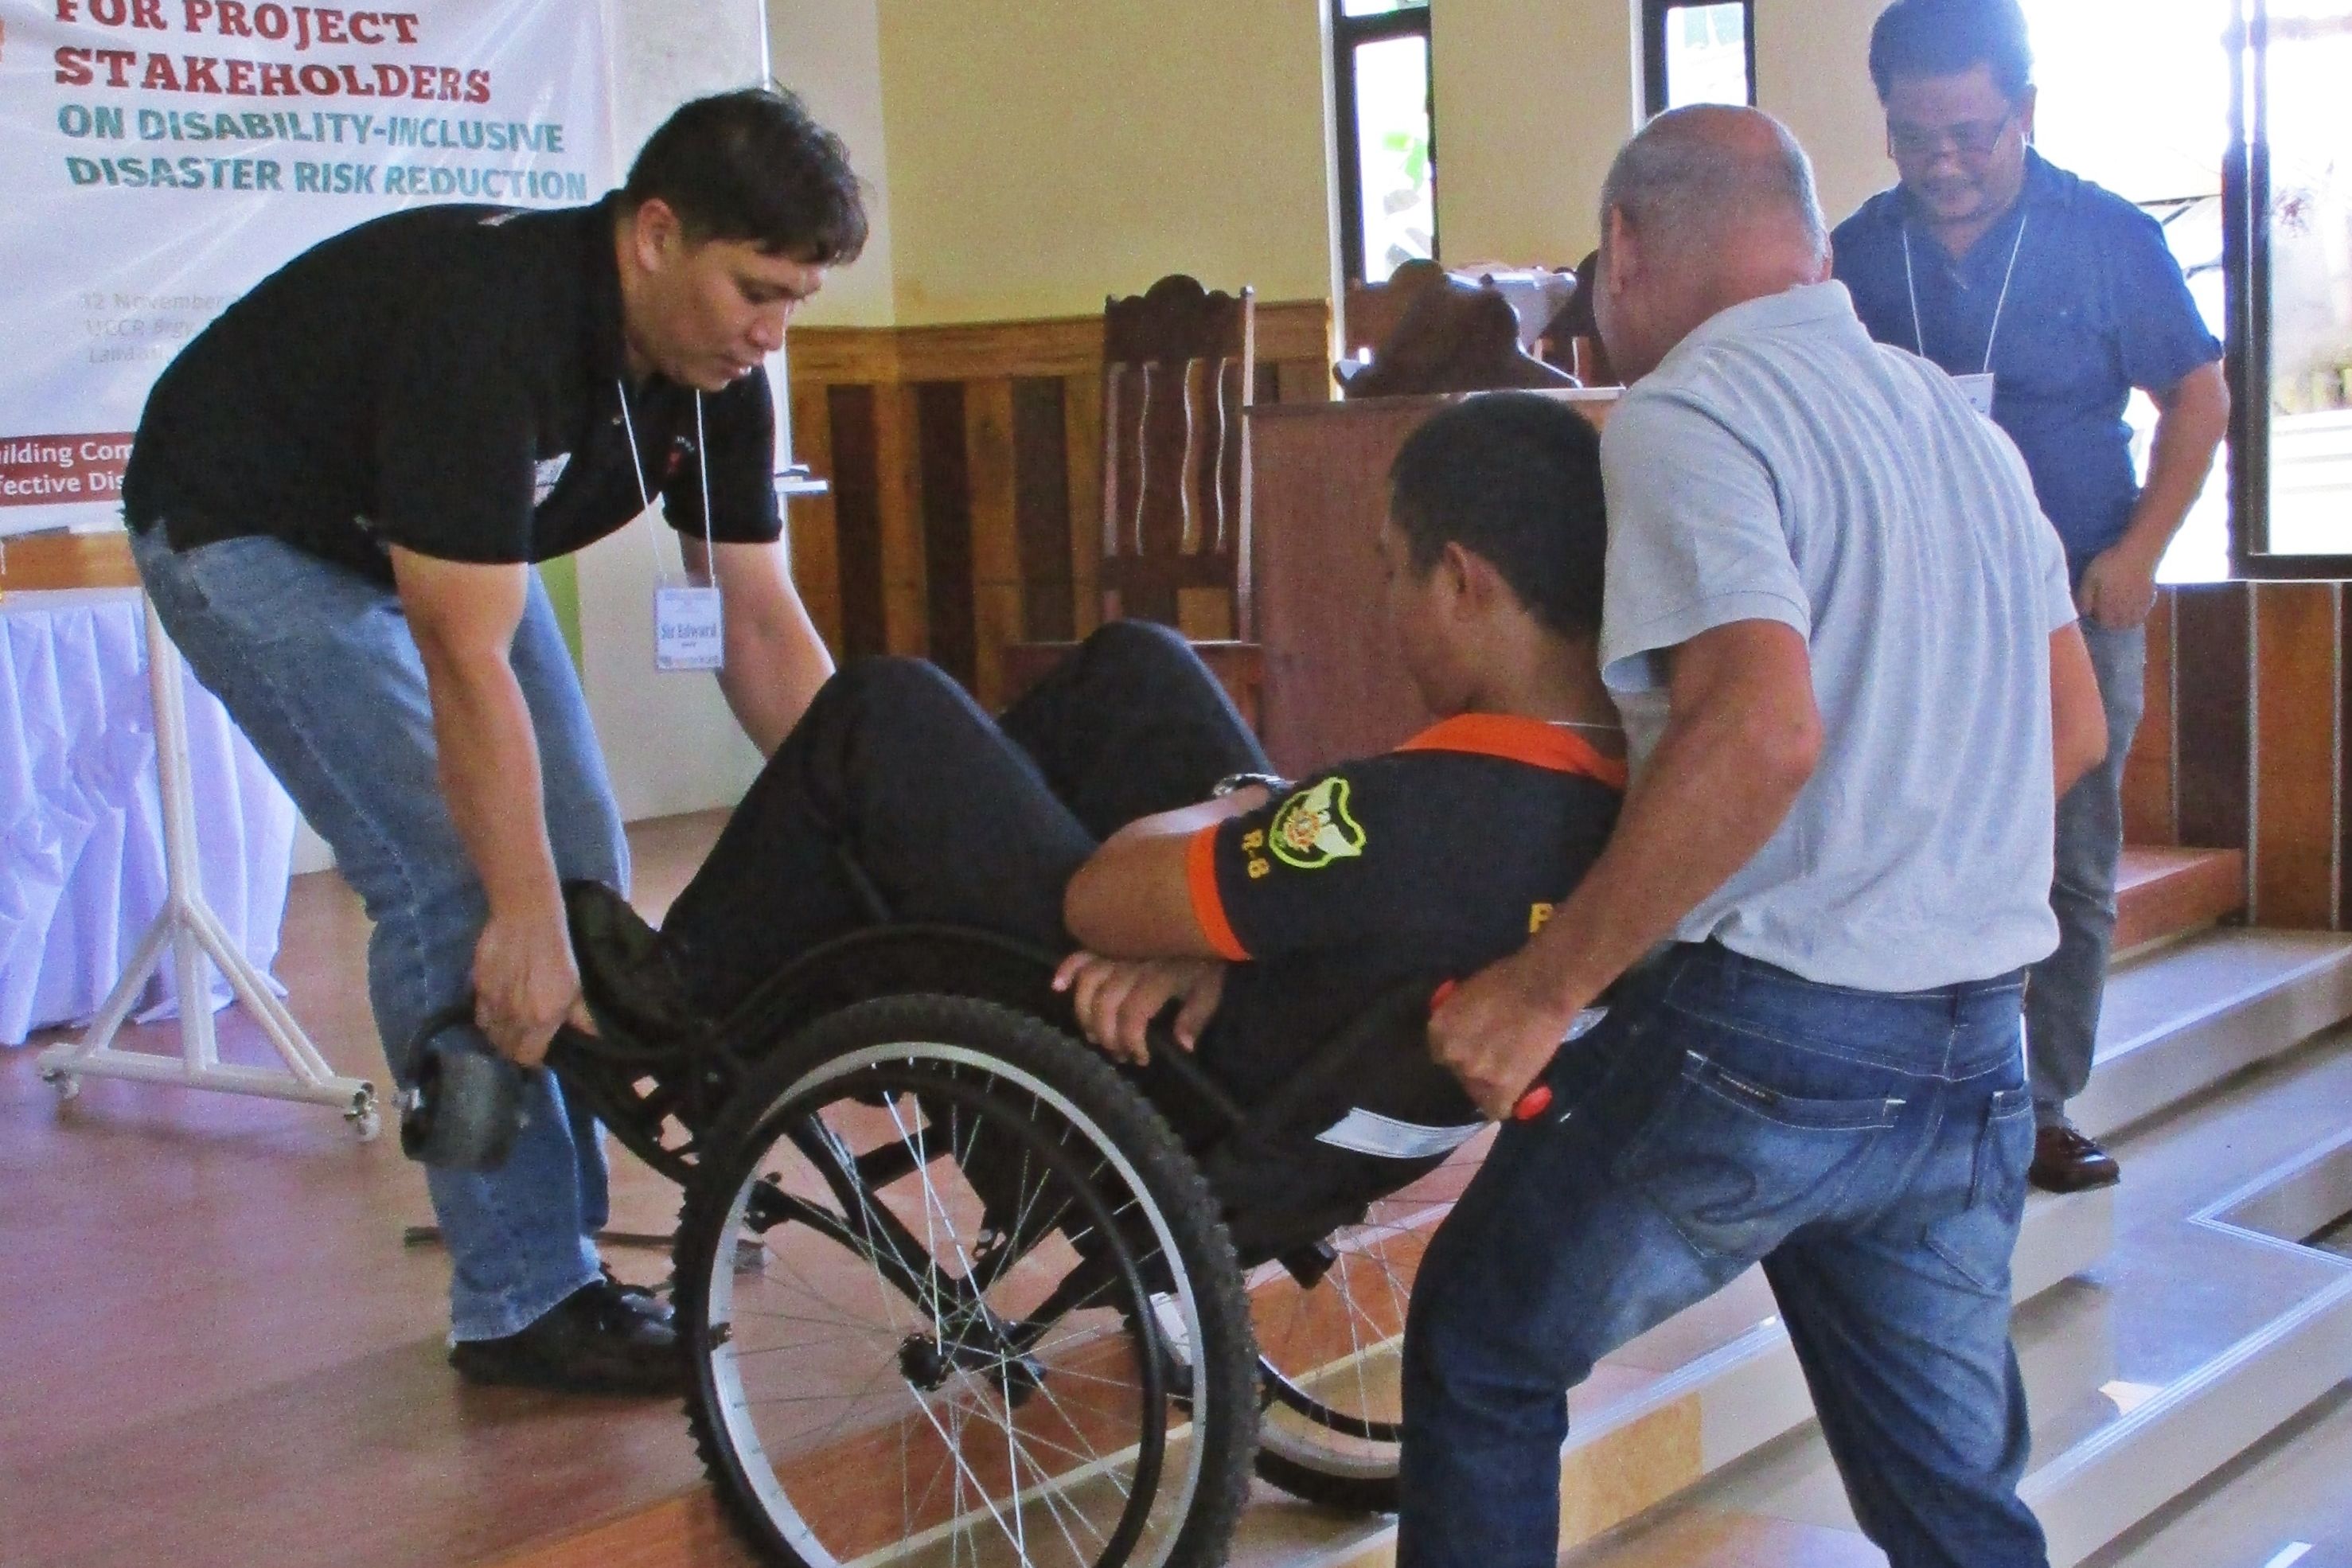 CDP-Practicing technique on evacuating wheelchair user-querer.jpg